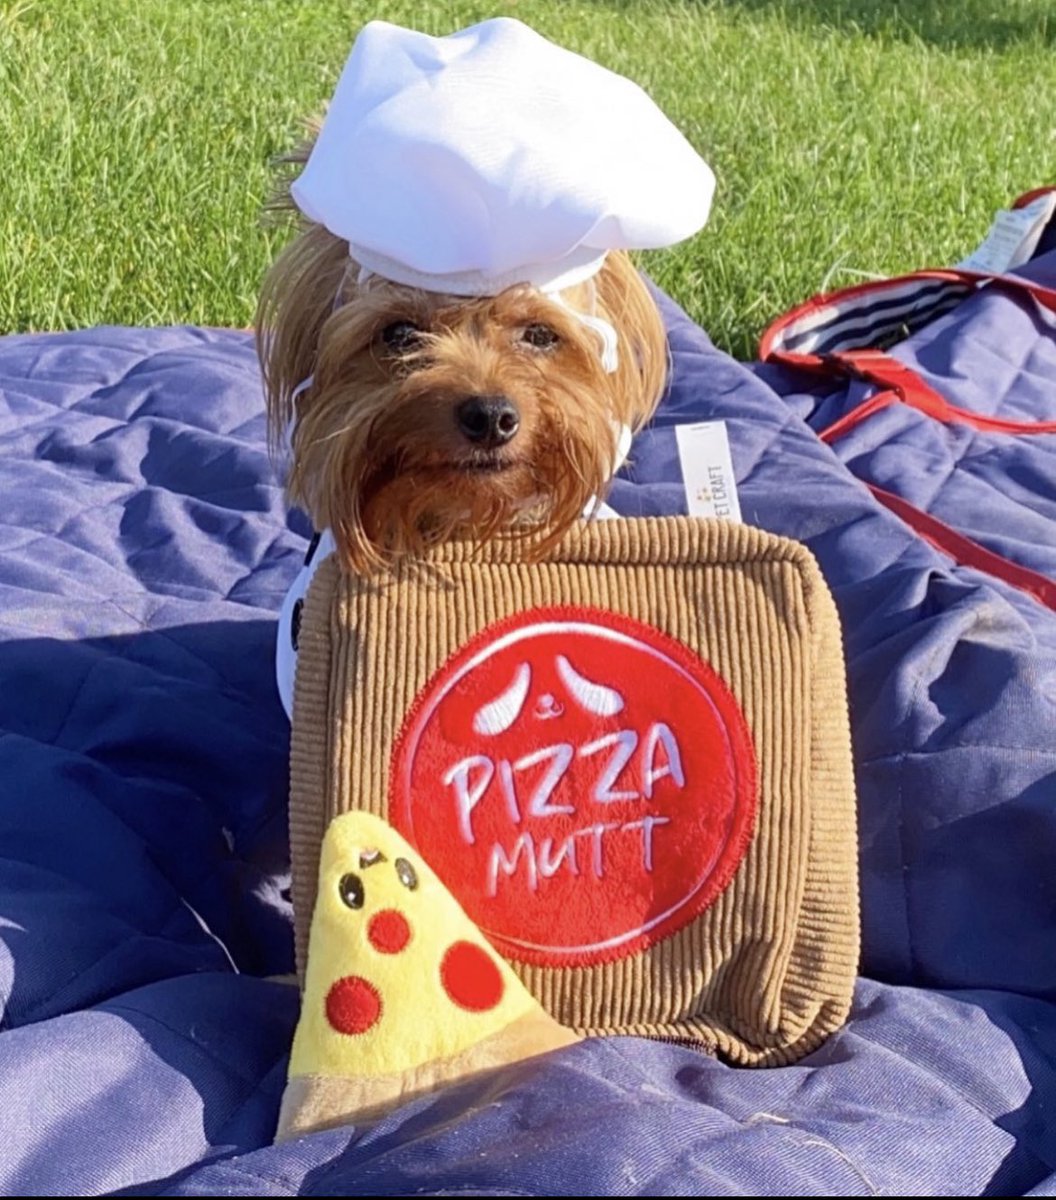 Happy National Pepperoni Pizza Day 🍕 May I take your order? #NationalPepperoniPizzaDay #pizza #PepperoniPizzaDay #cute #love #DogsOfTwitter #DogsofX #DogsOnTwitter #dogsarefamily